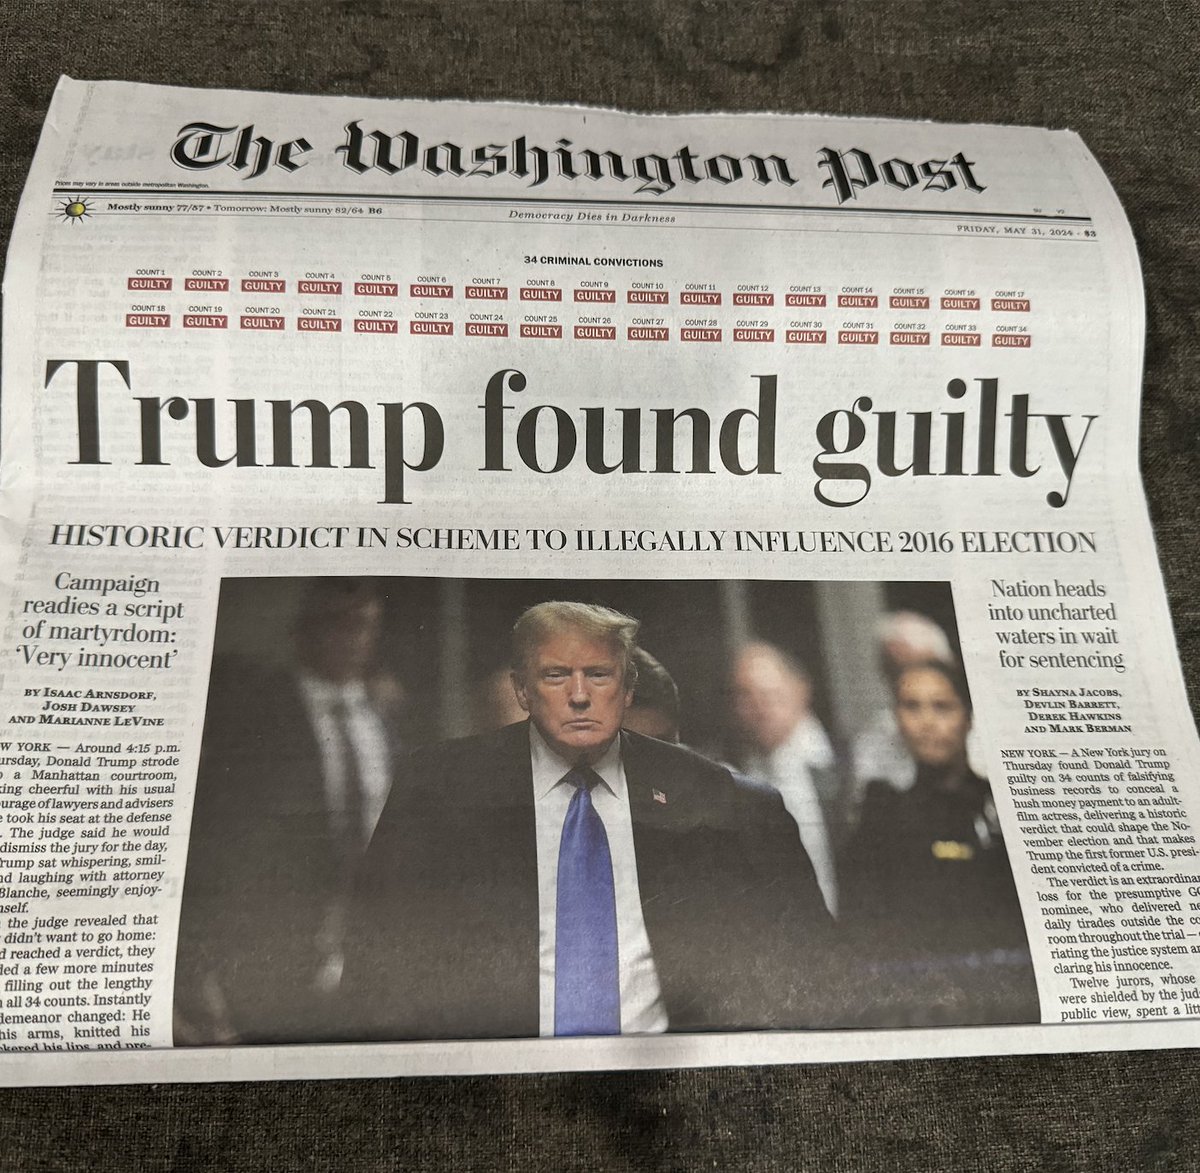 A glorious headline for the ages 👇 #NoOneIsAboveTheLaw